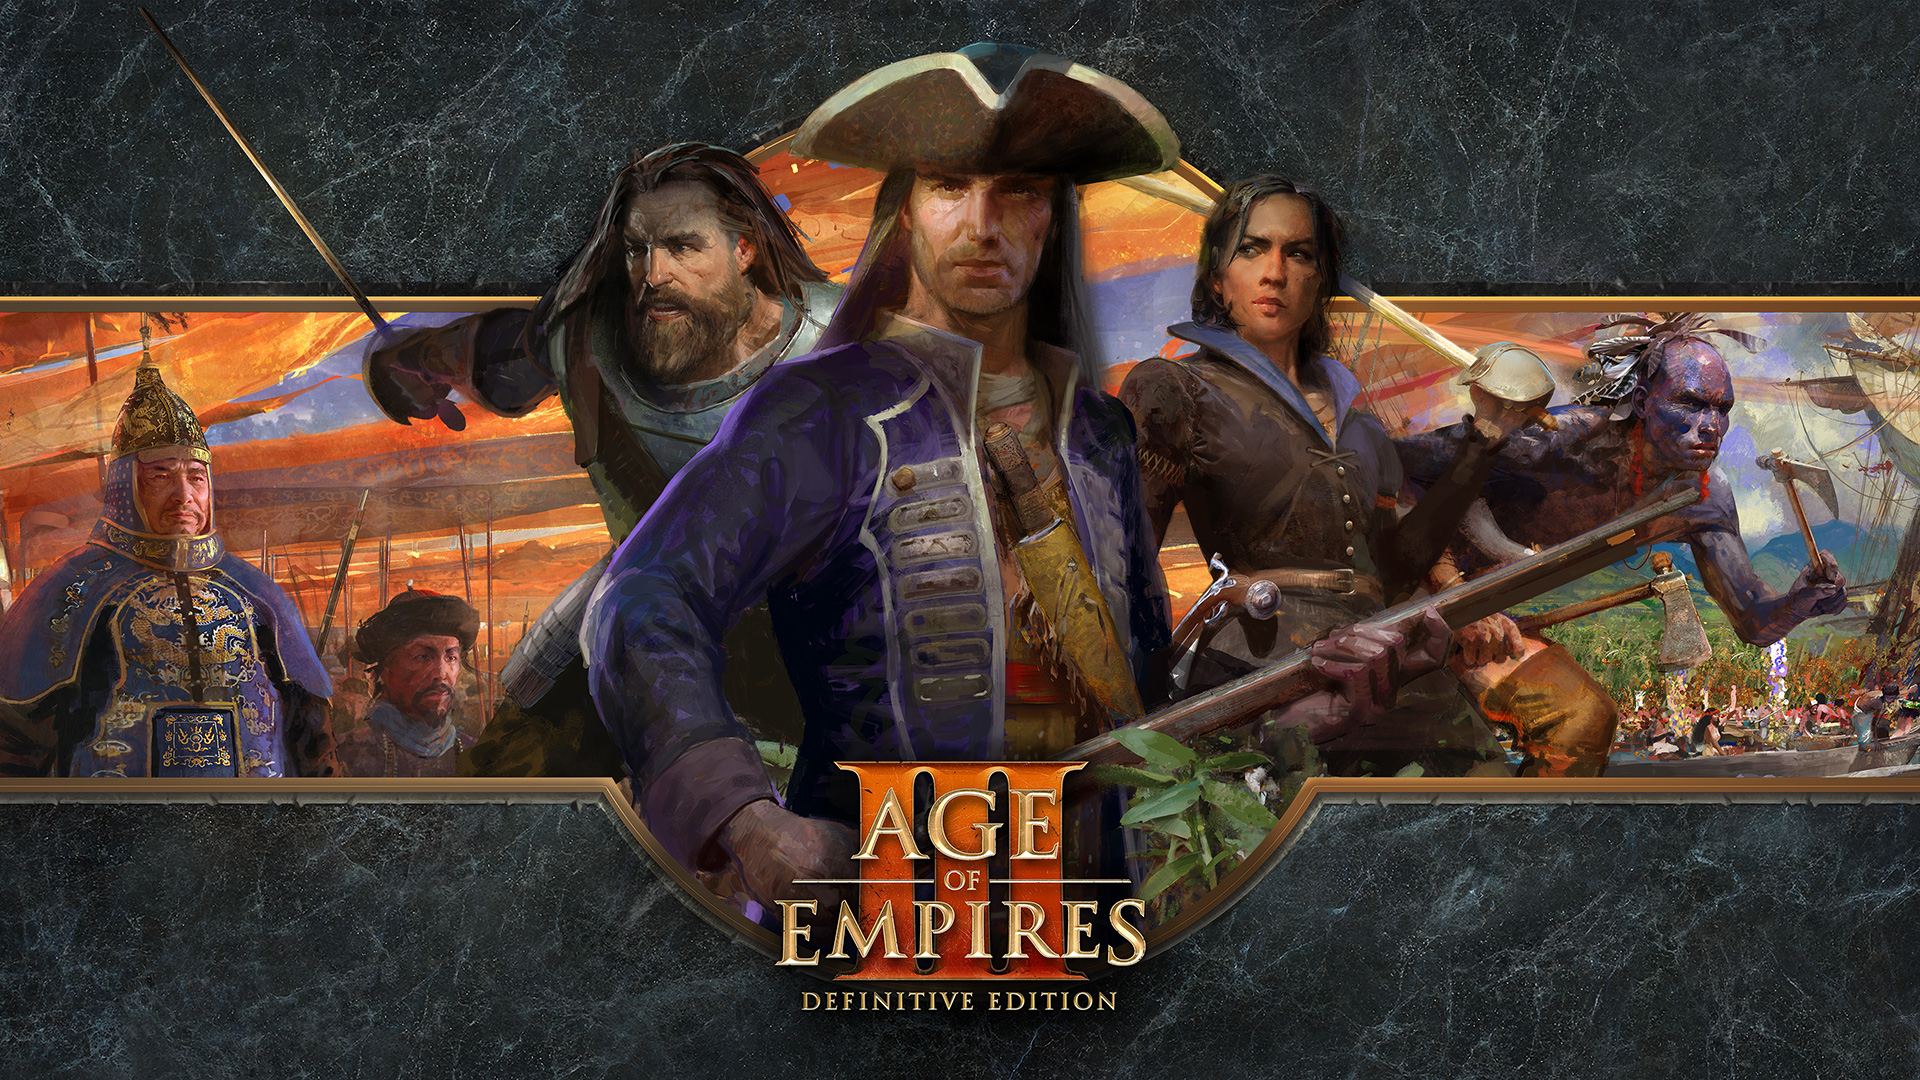 download free age of empires 3 definitive edition dlc